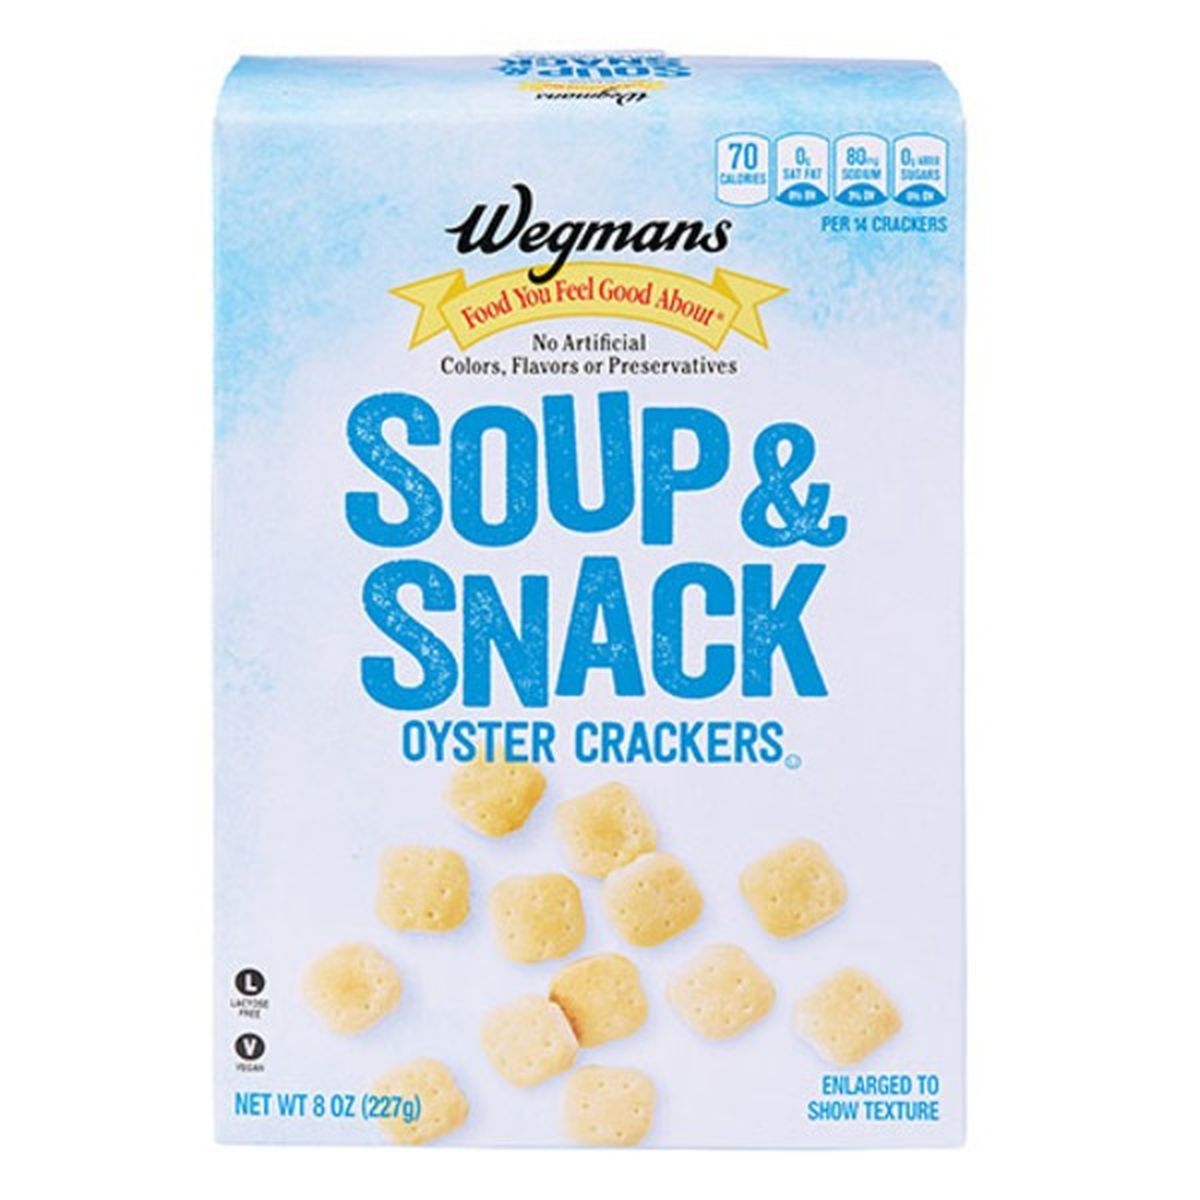 Calories in Wegmans Soup & Snack Oyster Crackers